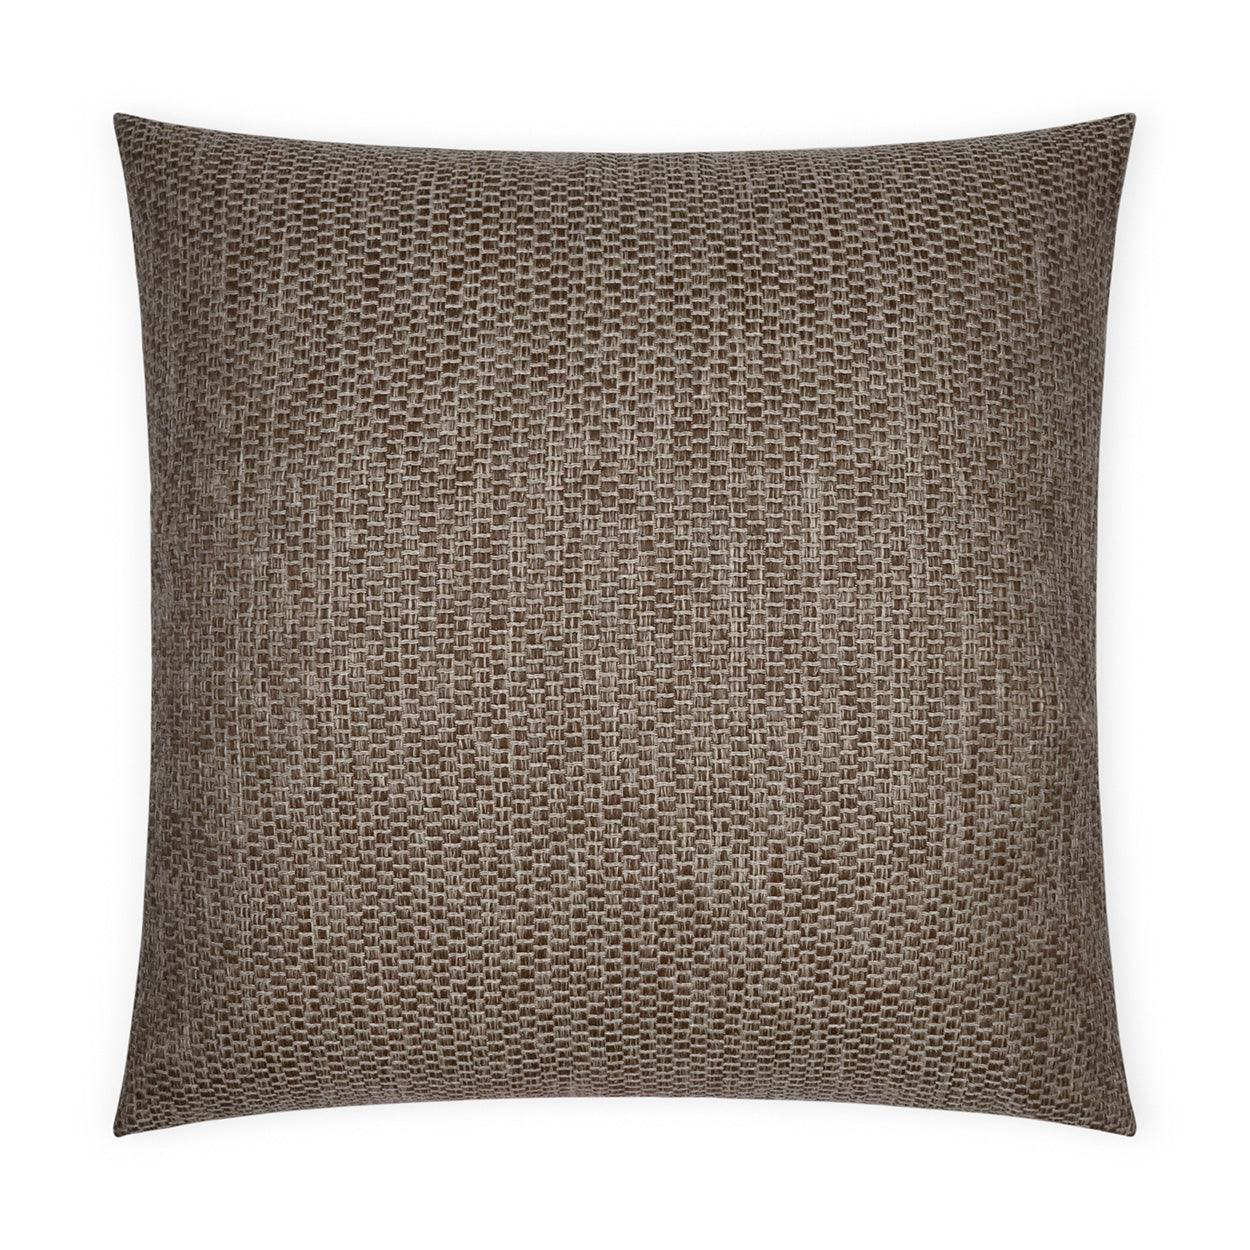 Smoothie Mocha Solid Brown Large Throw Pillow With Insert - Uptown Sebastian